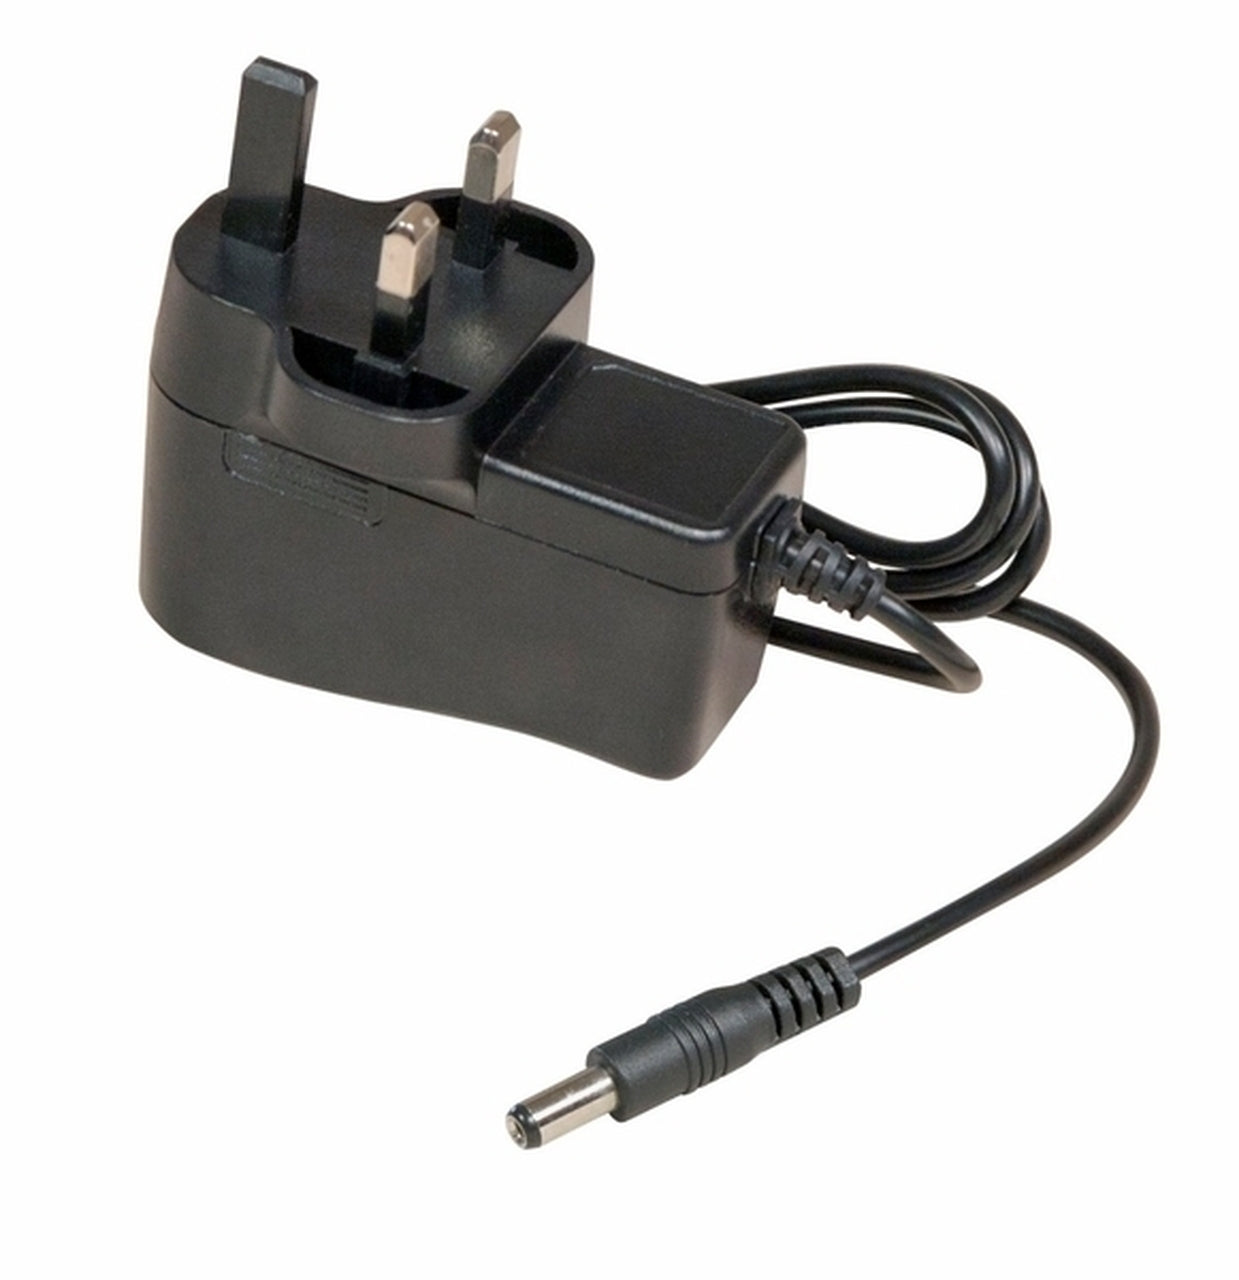 ACUK-12V - AC 90-240V input power adapter for FRM220, FIB1 and FMC Fosco Connect